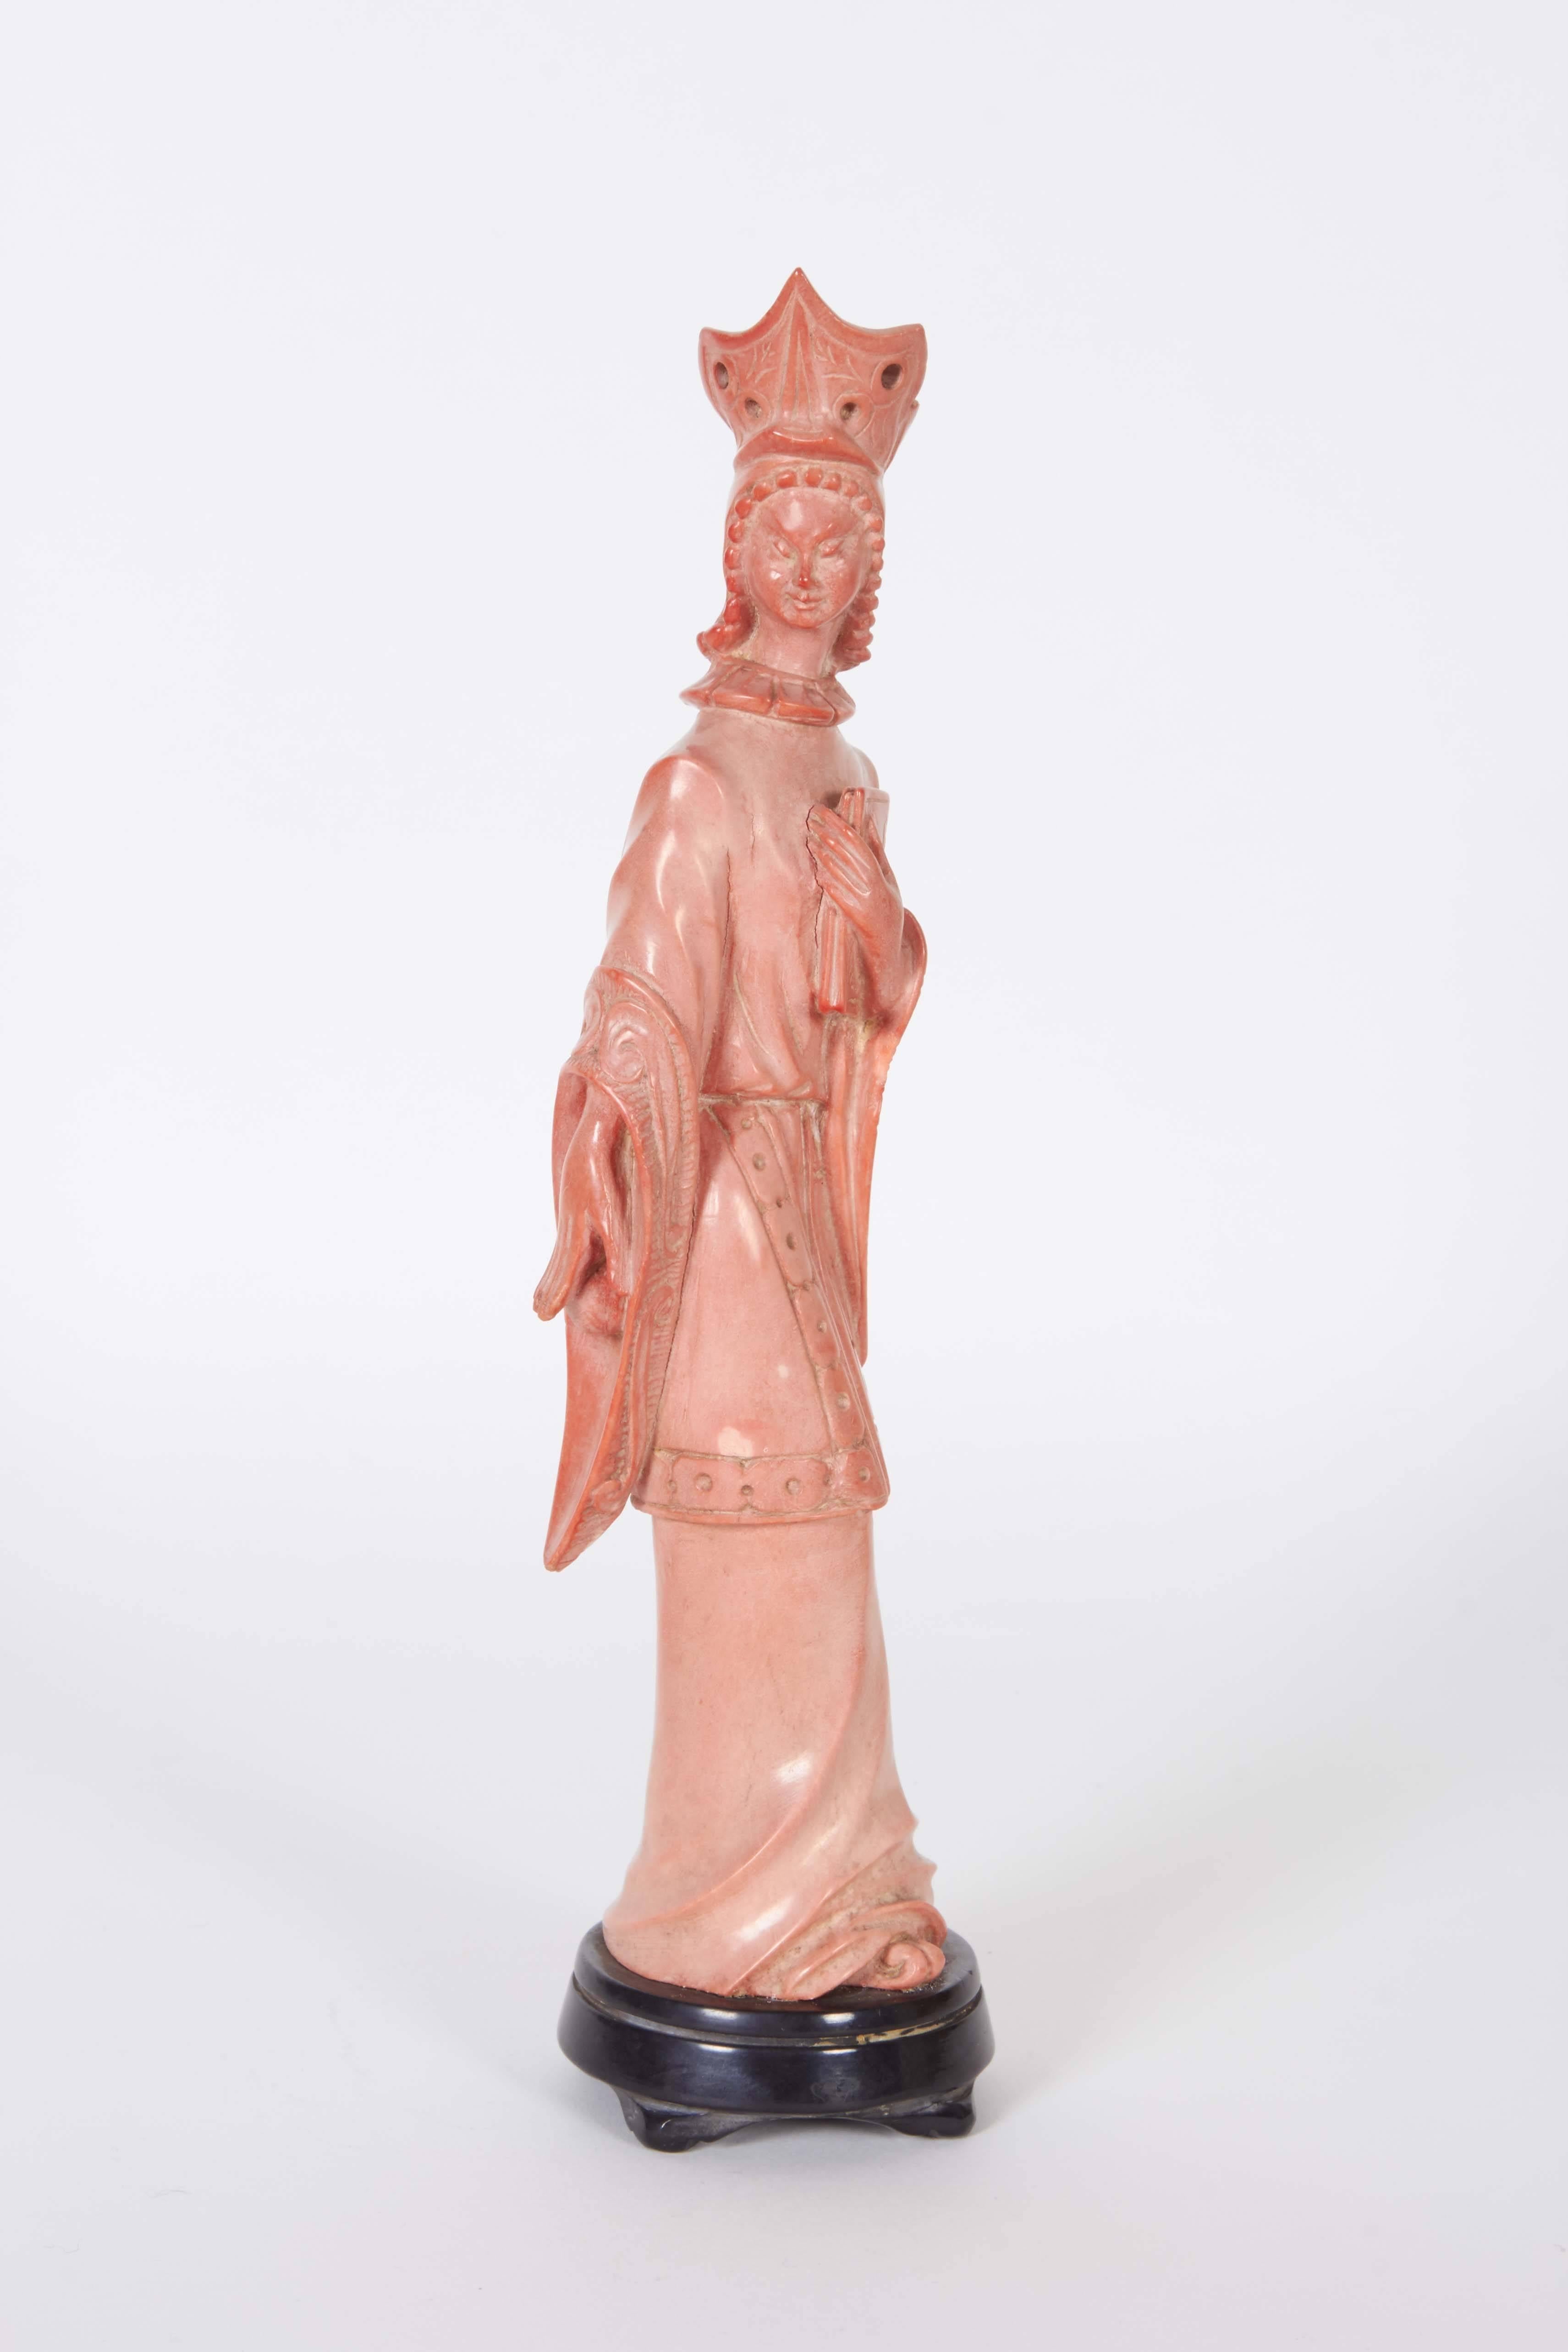 20th Century Carved Composite Stone Sculpture of Guanyin on Base